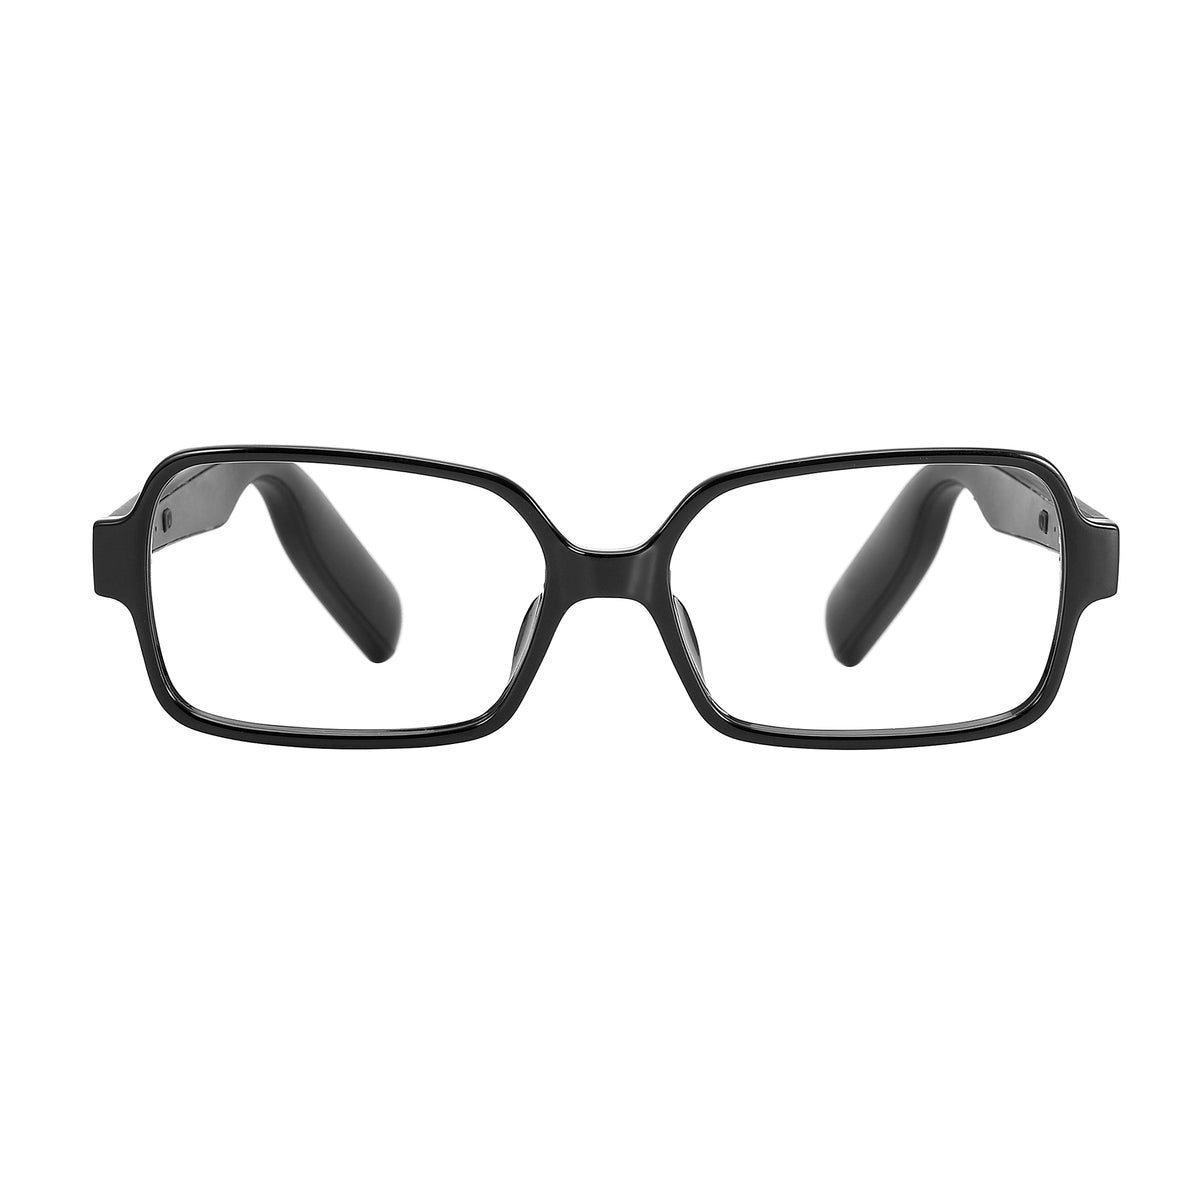 Novella - Bluetooth Reading Glasses With Interchangeable Front Frame